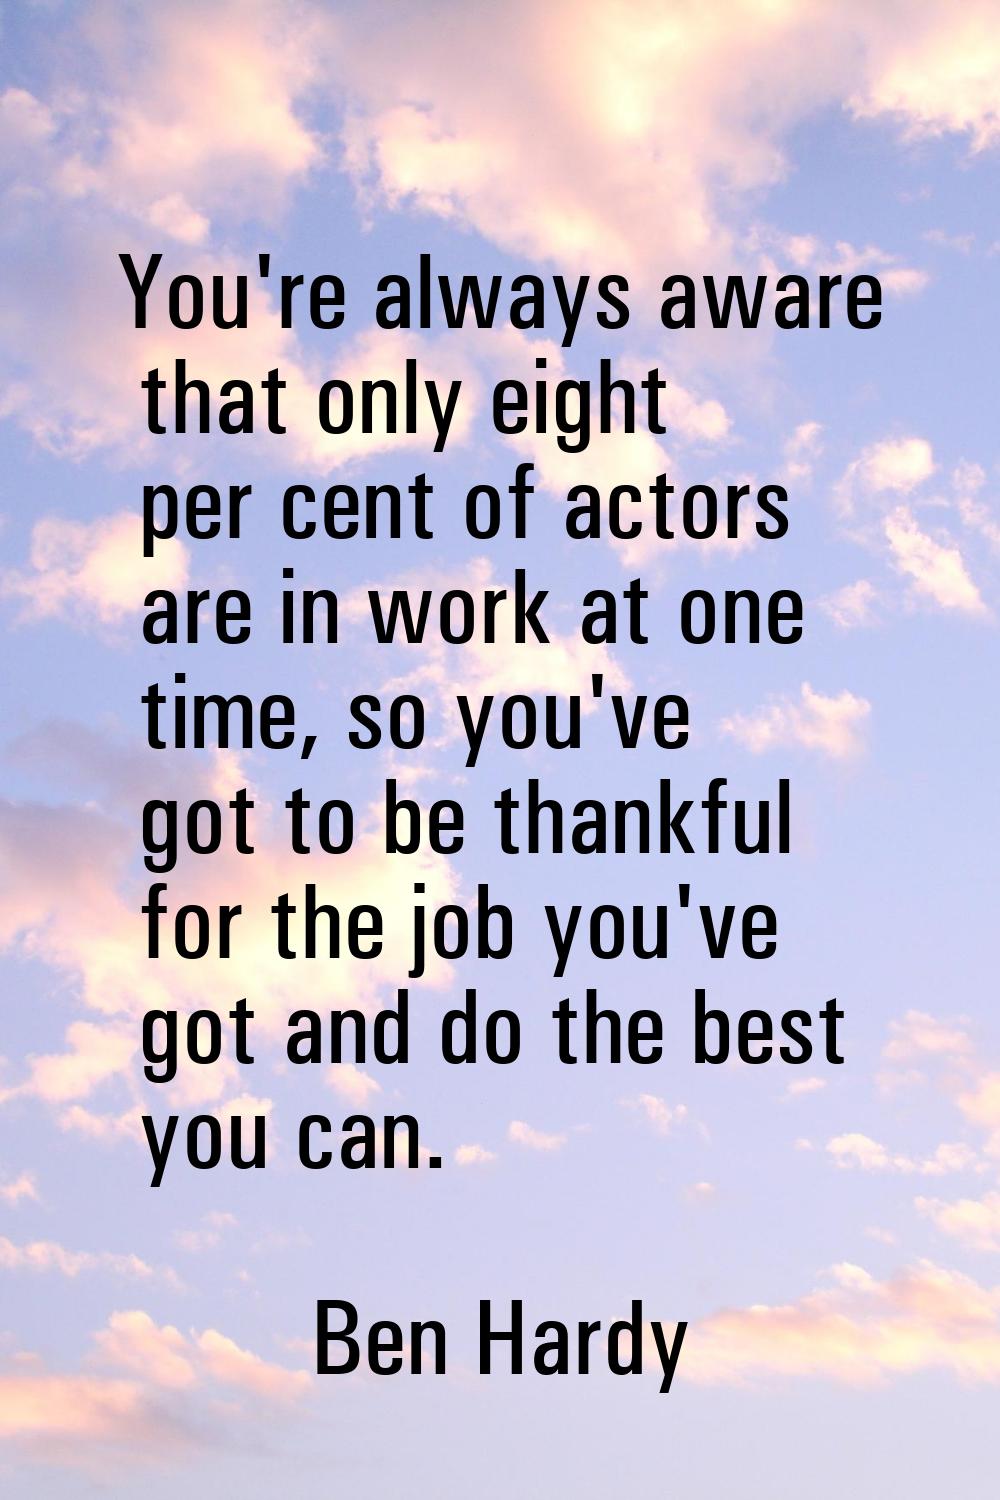 You're always aware that only eight per cent of actors are in work at one time, so you've got to be